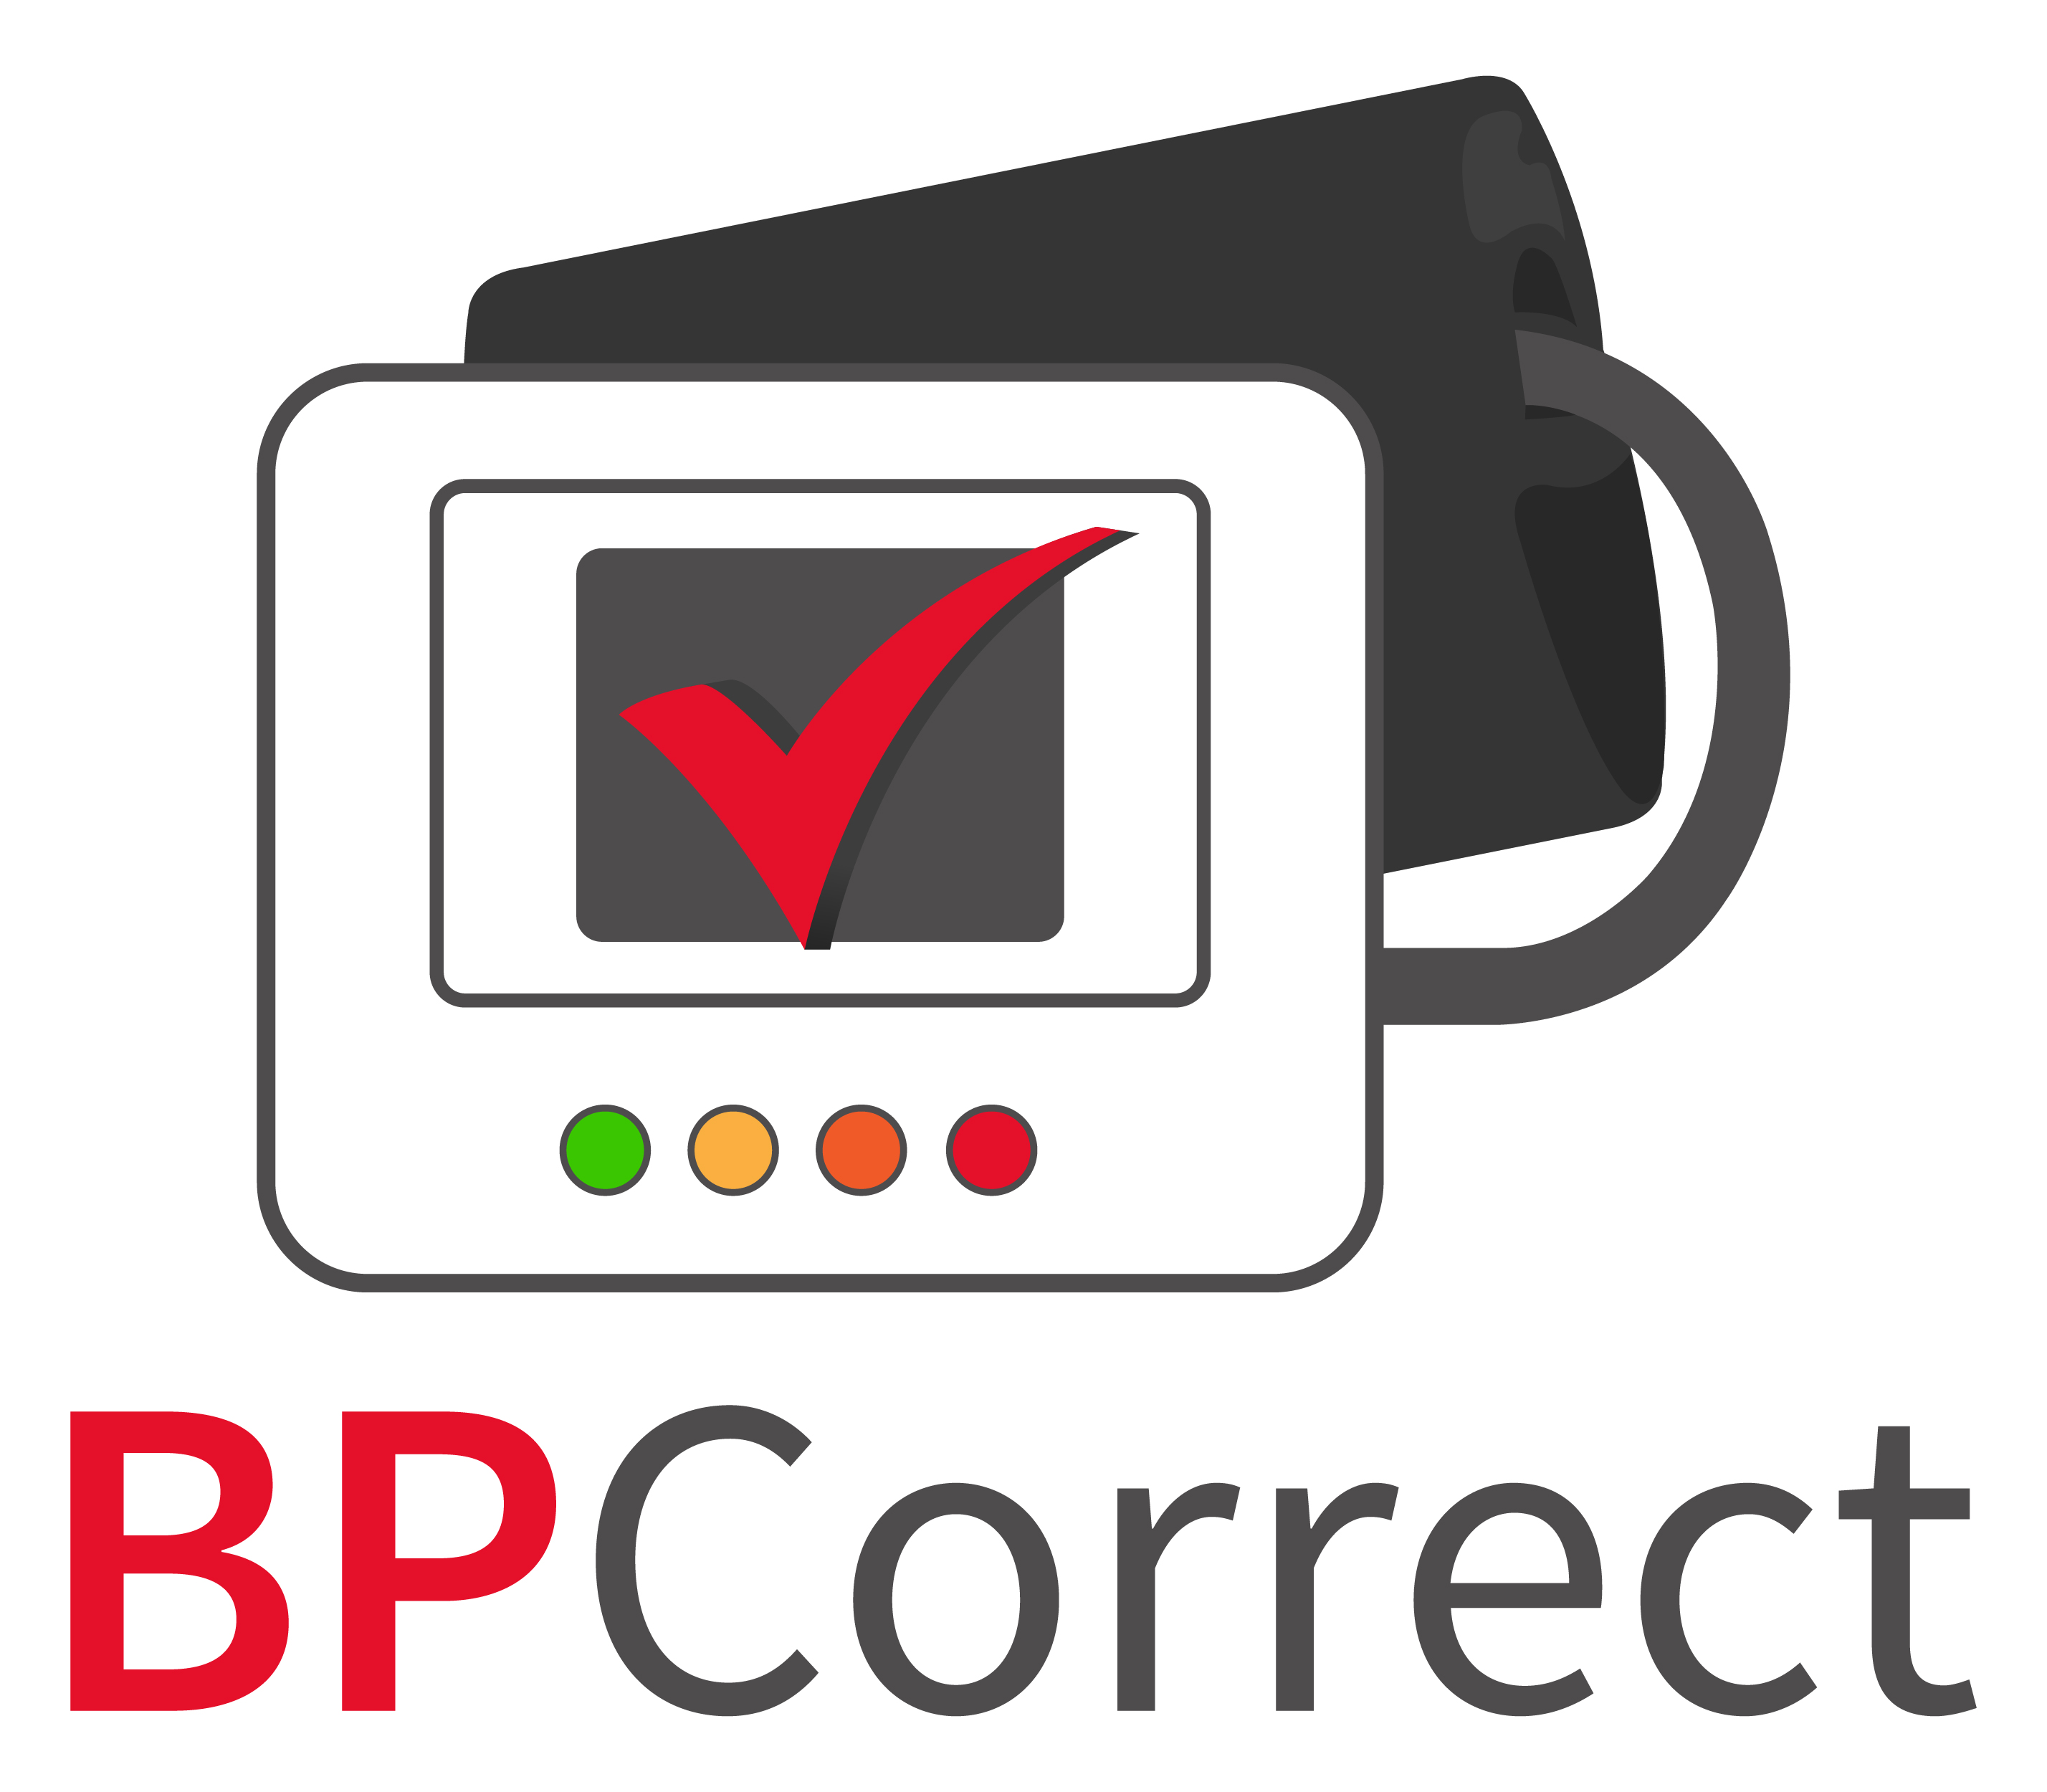 BPCorrect App Helps Detect, Monitor, and Treat High Blood Pressure with Accurate Readings, Shareable Results